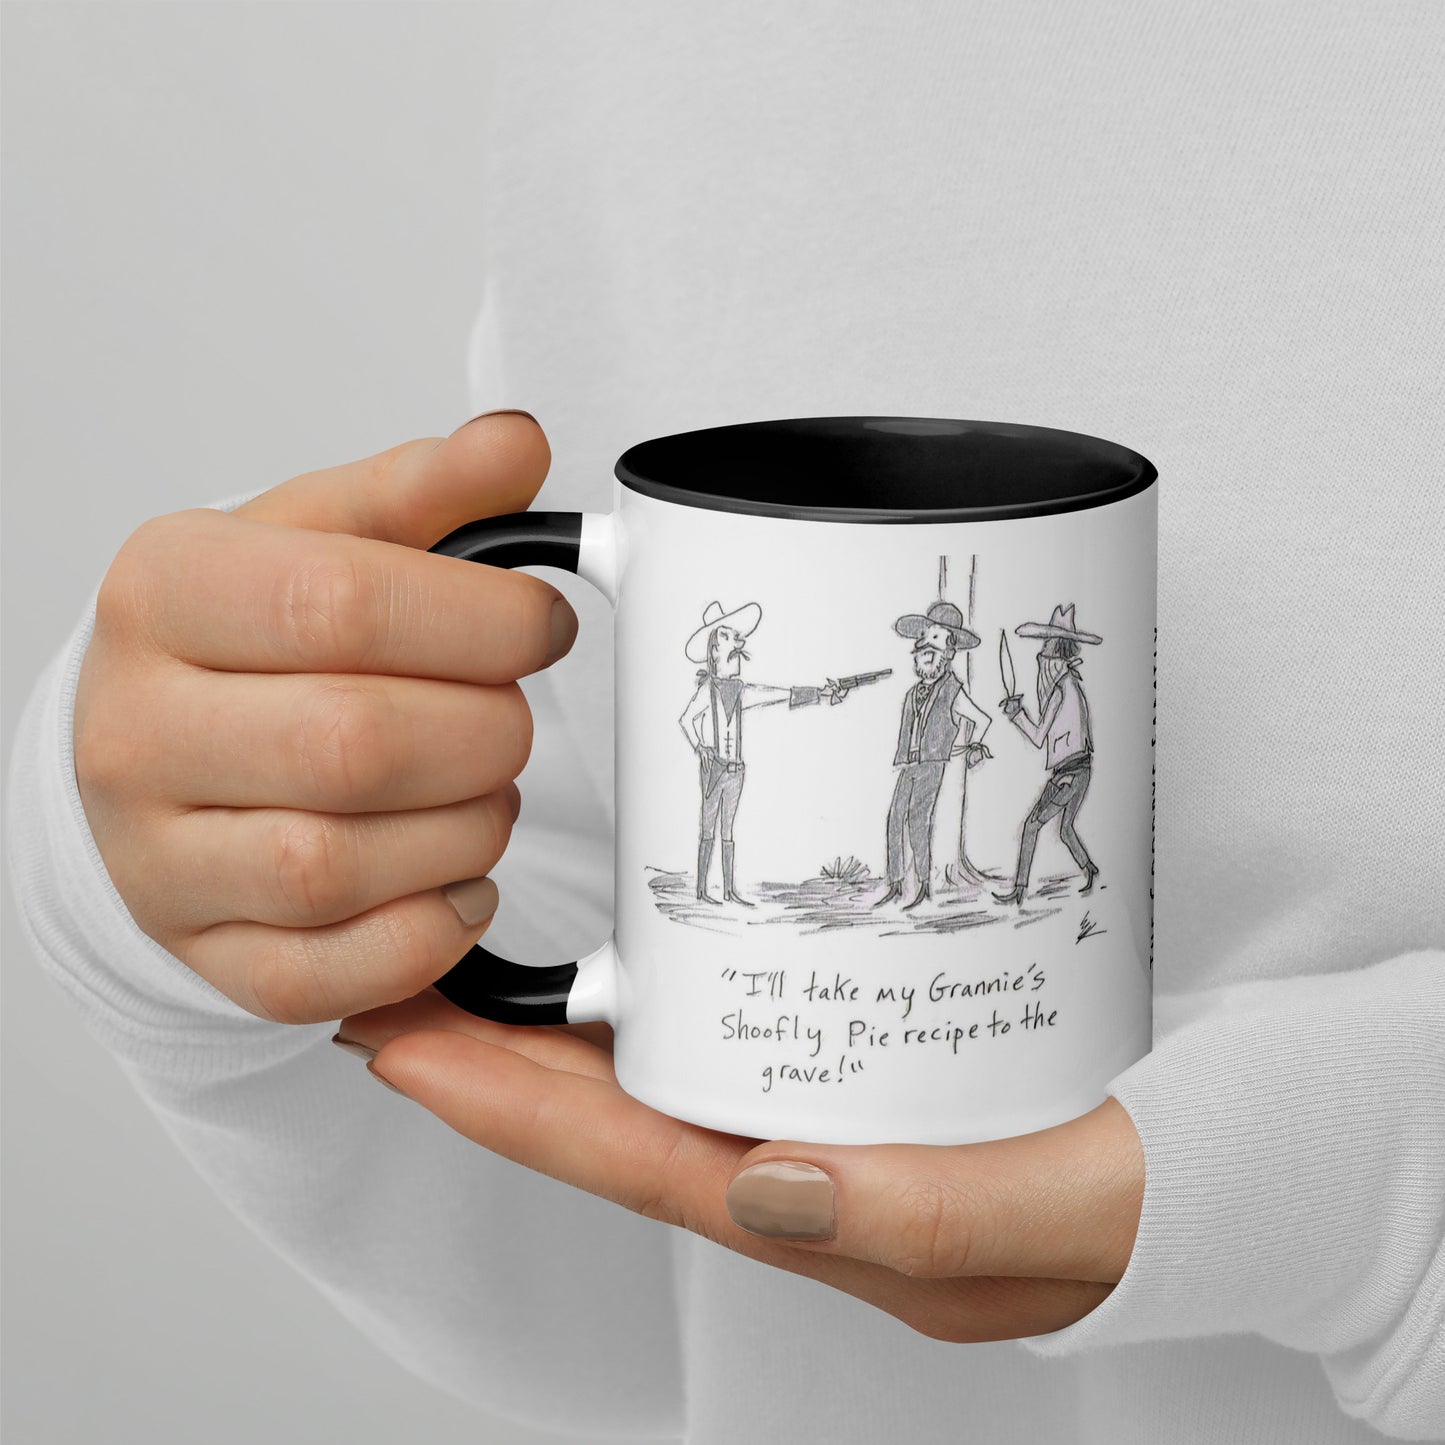 The Goodbye Family Mug More Funnies with Black color inside